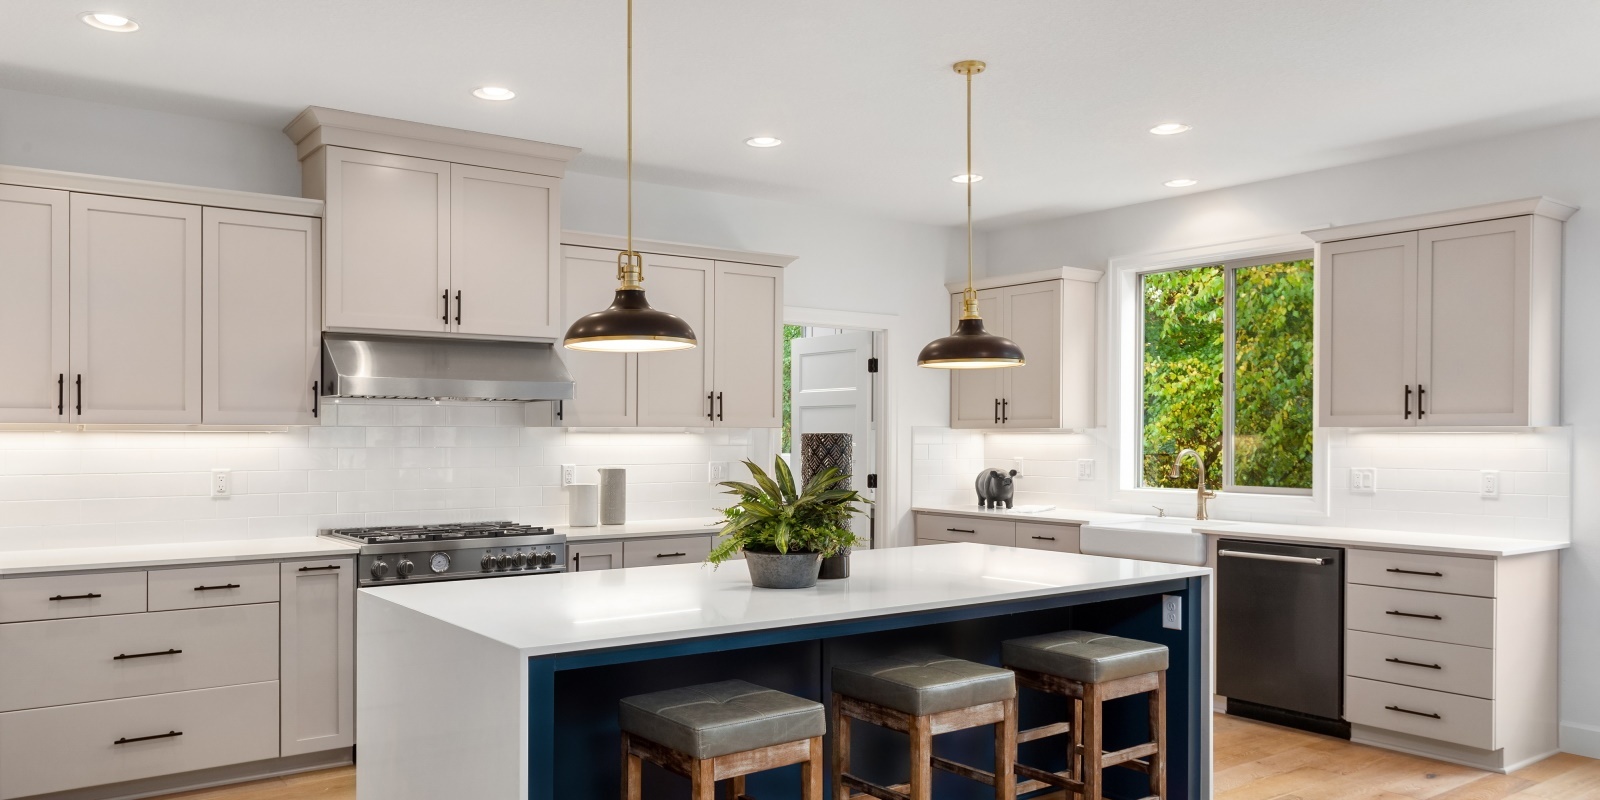 Kitchen Lighting Guide for Homeowners